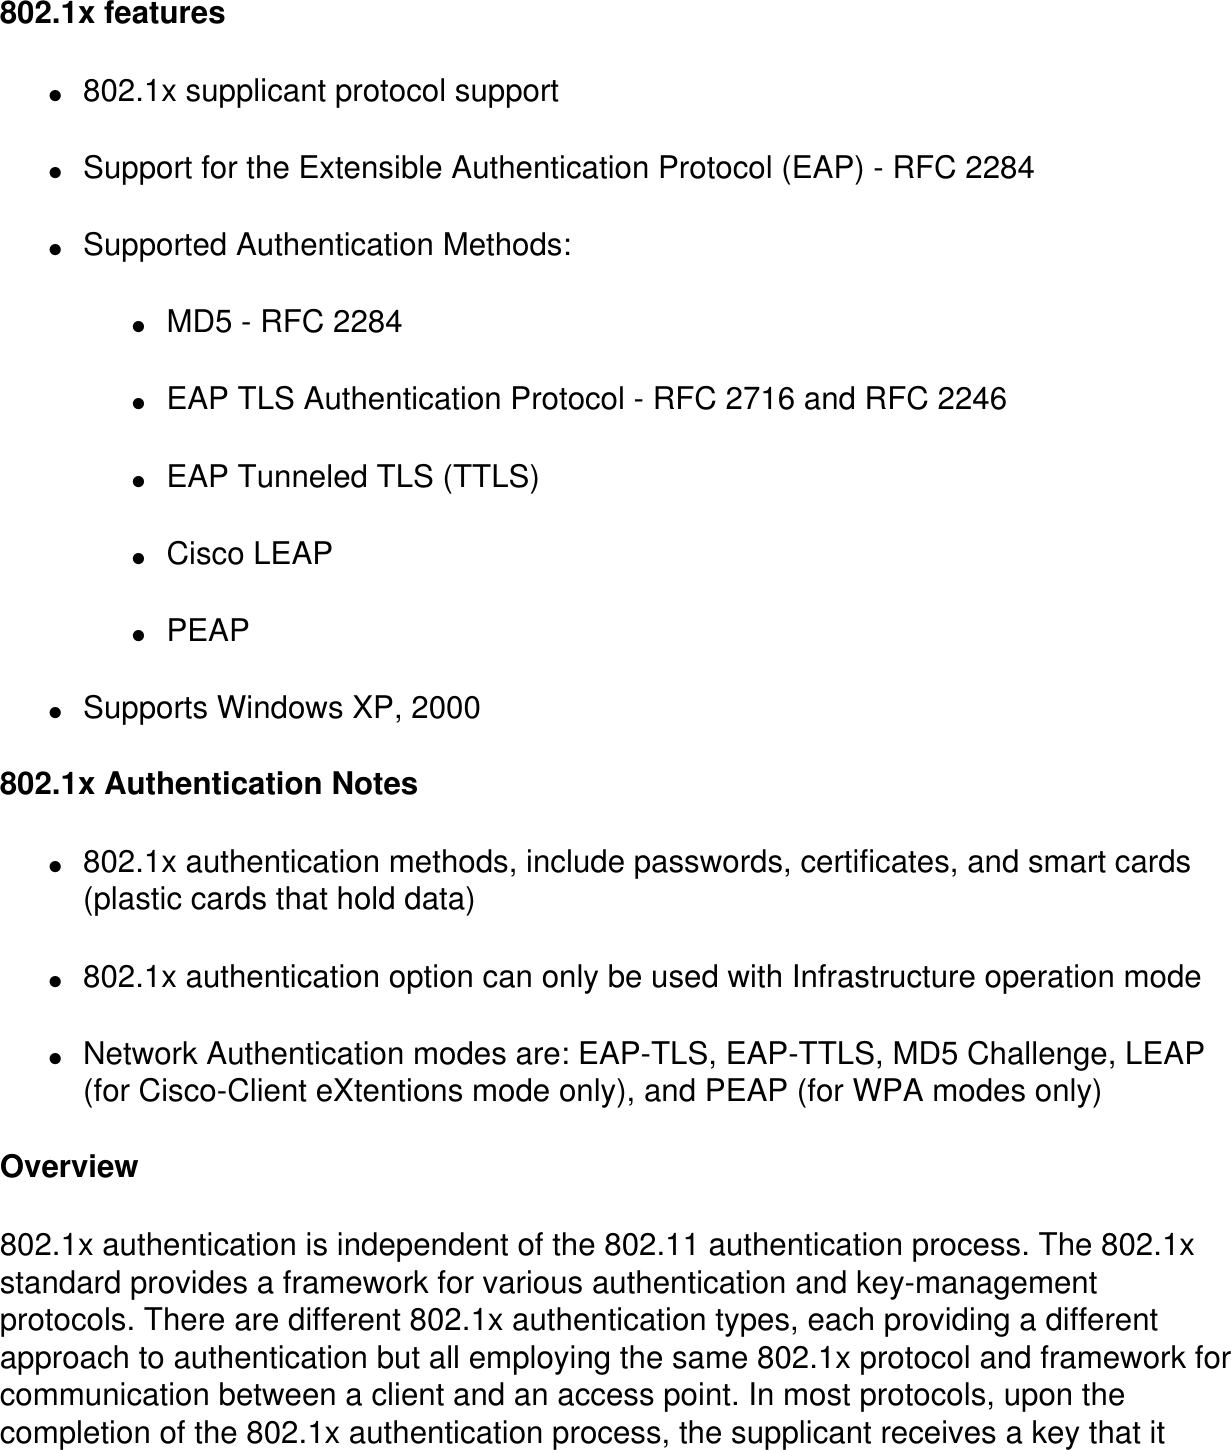 802.1x features●     802.1x supplicant protocol support●     Support for the Extensible Authentication Protocol (EAP) - RFC 2284●     Supported Authentication Methods:●     MD5 - RFC 2284●     EAP TLS Authentication Protocol - RFC 2716 and RFC 2246●     EAP Tunneled TLS (TTLS)●     Cisco LEAP●     PEAP●     Supports Windows XP, 2000  802.1x Authentication Notes●     802.1x authentication methods, include passwords, certificates, and smart cards (plastic cards that hold data)●     802.1x authentication option can only be used with Infrastructure operation mode●     Network Authentication modes are: EAP-TLS, EAP-TTLS, MD5 Challenge, LEAP (for Cisco-Client eXtentions mode only), and PEAP (for WPA modes only)Overview802.1x authentication is independent of the 802.11 authentication process. The 802.1x standard provides a framework for various authentication and key-management protocols. There are different 802.1x authentication types, each providing a different approach to authentication but all employing the same 802.1x protocol and framework for communication between a client and an access point. In most protocols, upon the completion of the 802.1x authentication process, the supplicant receives a key that it 